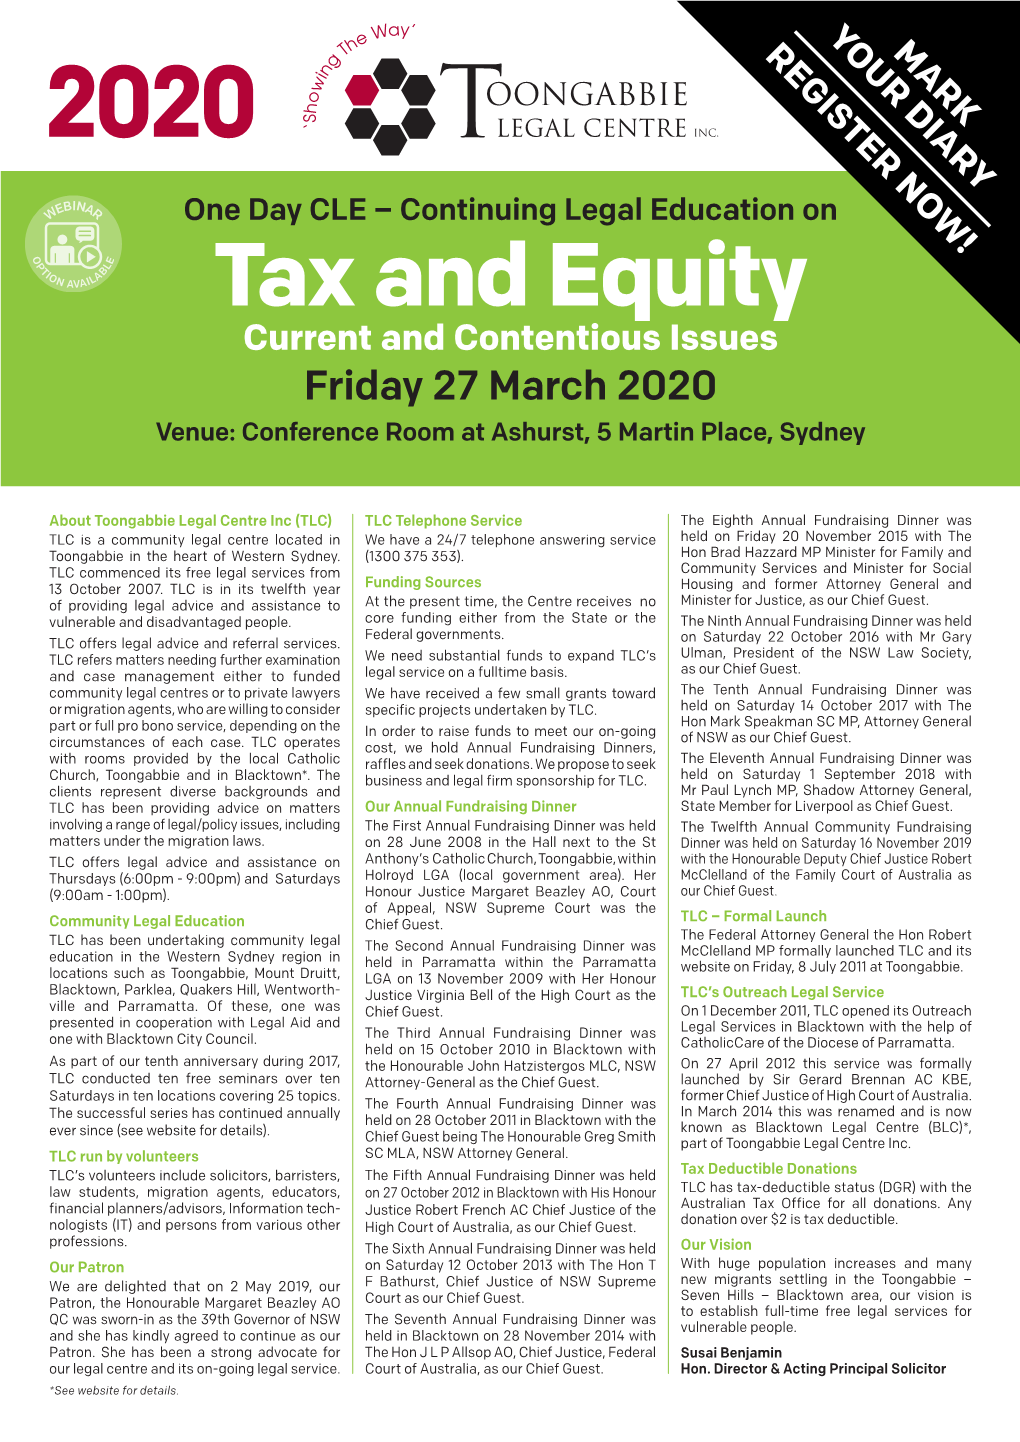 Tax & Equity: Current and Contentious Issues